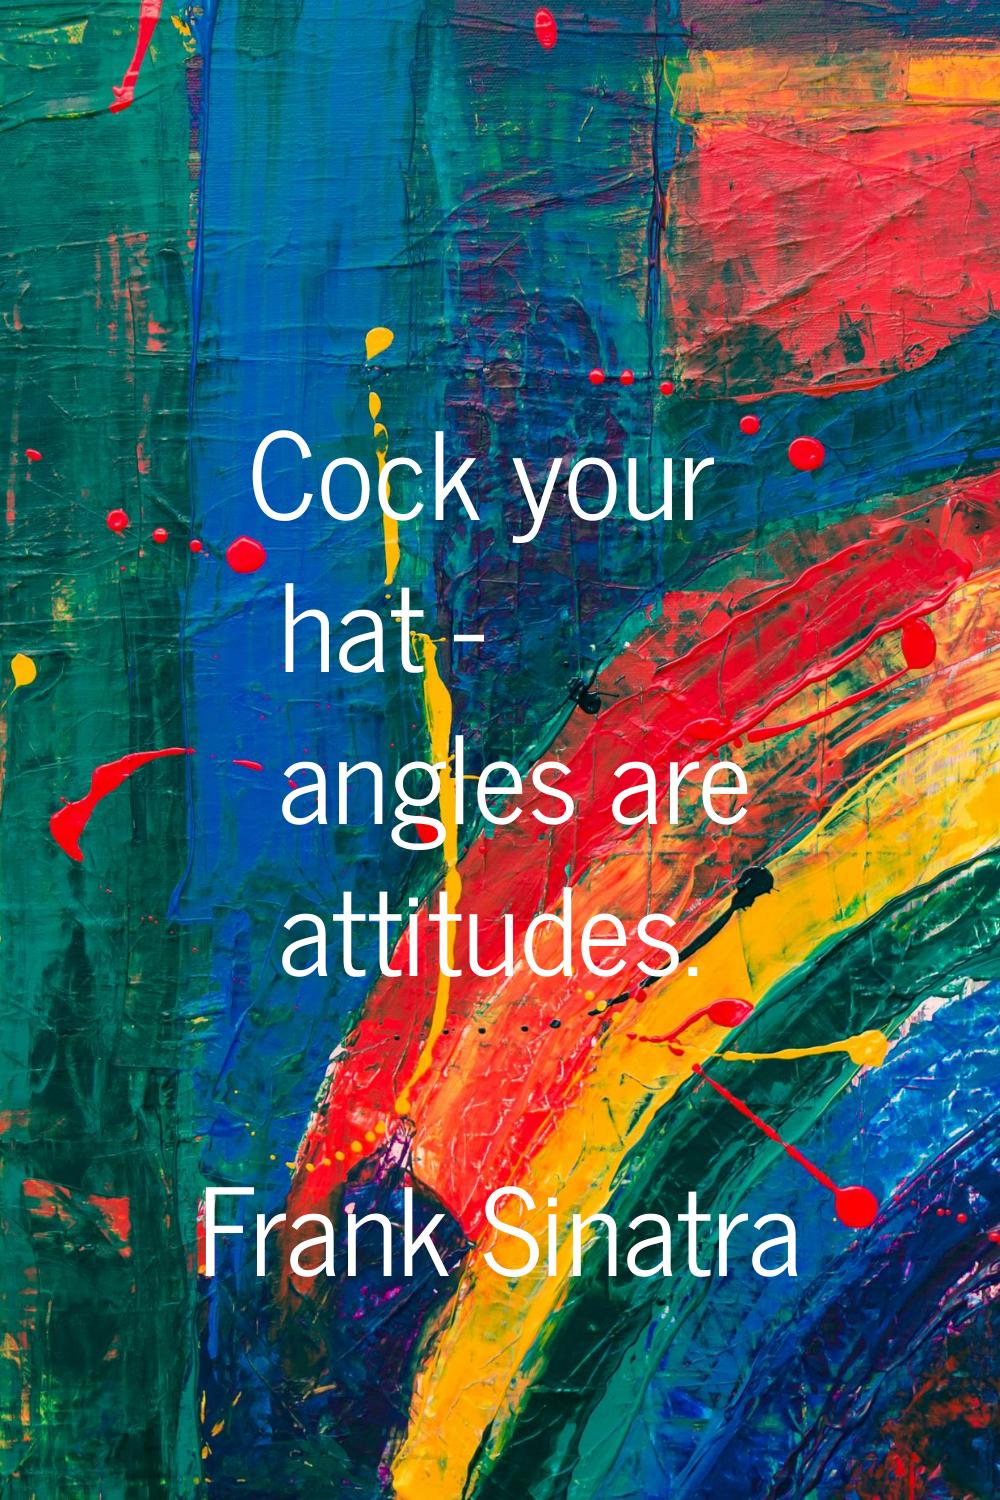 Cock your hat - angles are attitudes.